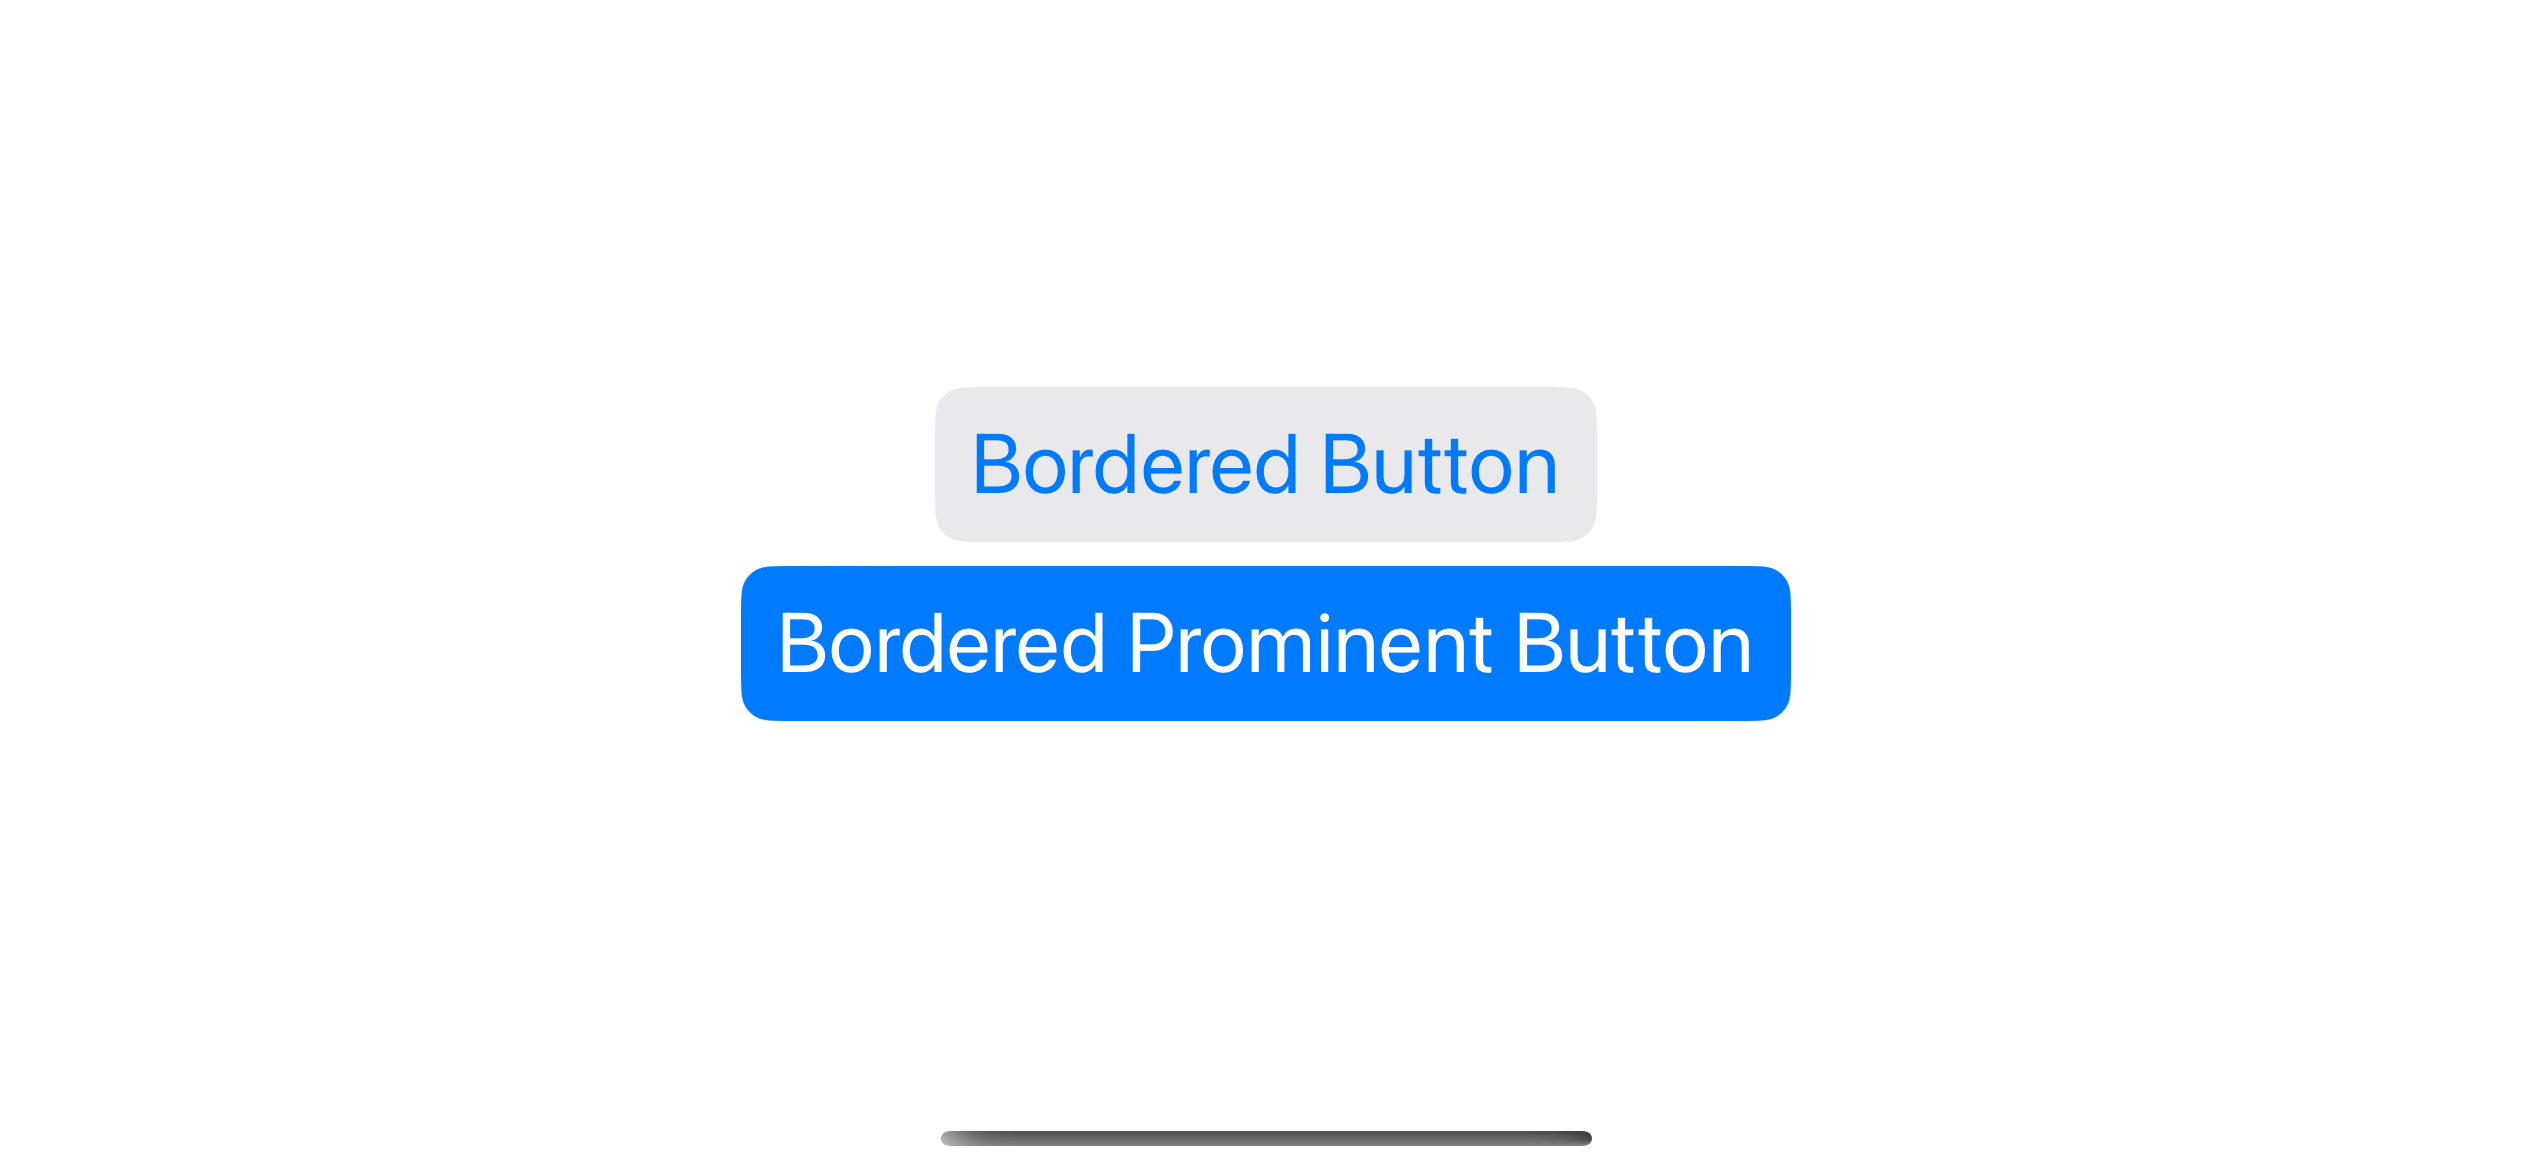 bordered and borderedProminent button styles.